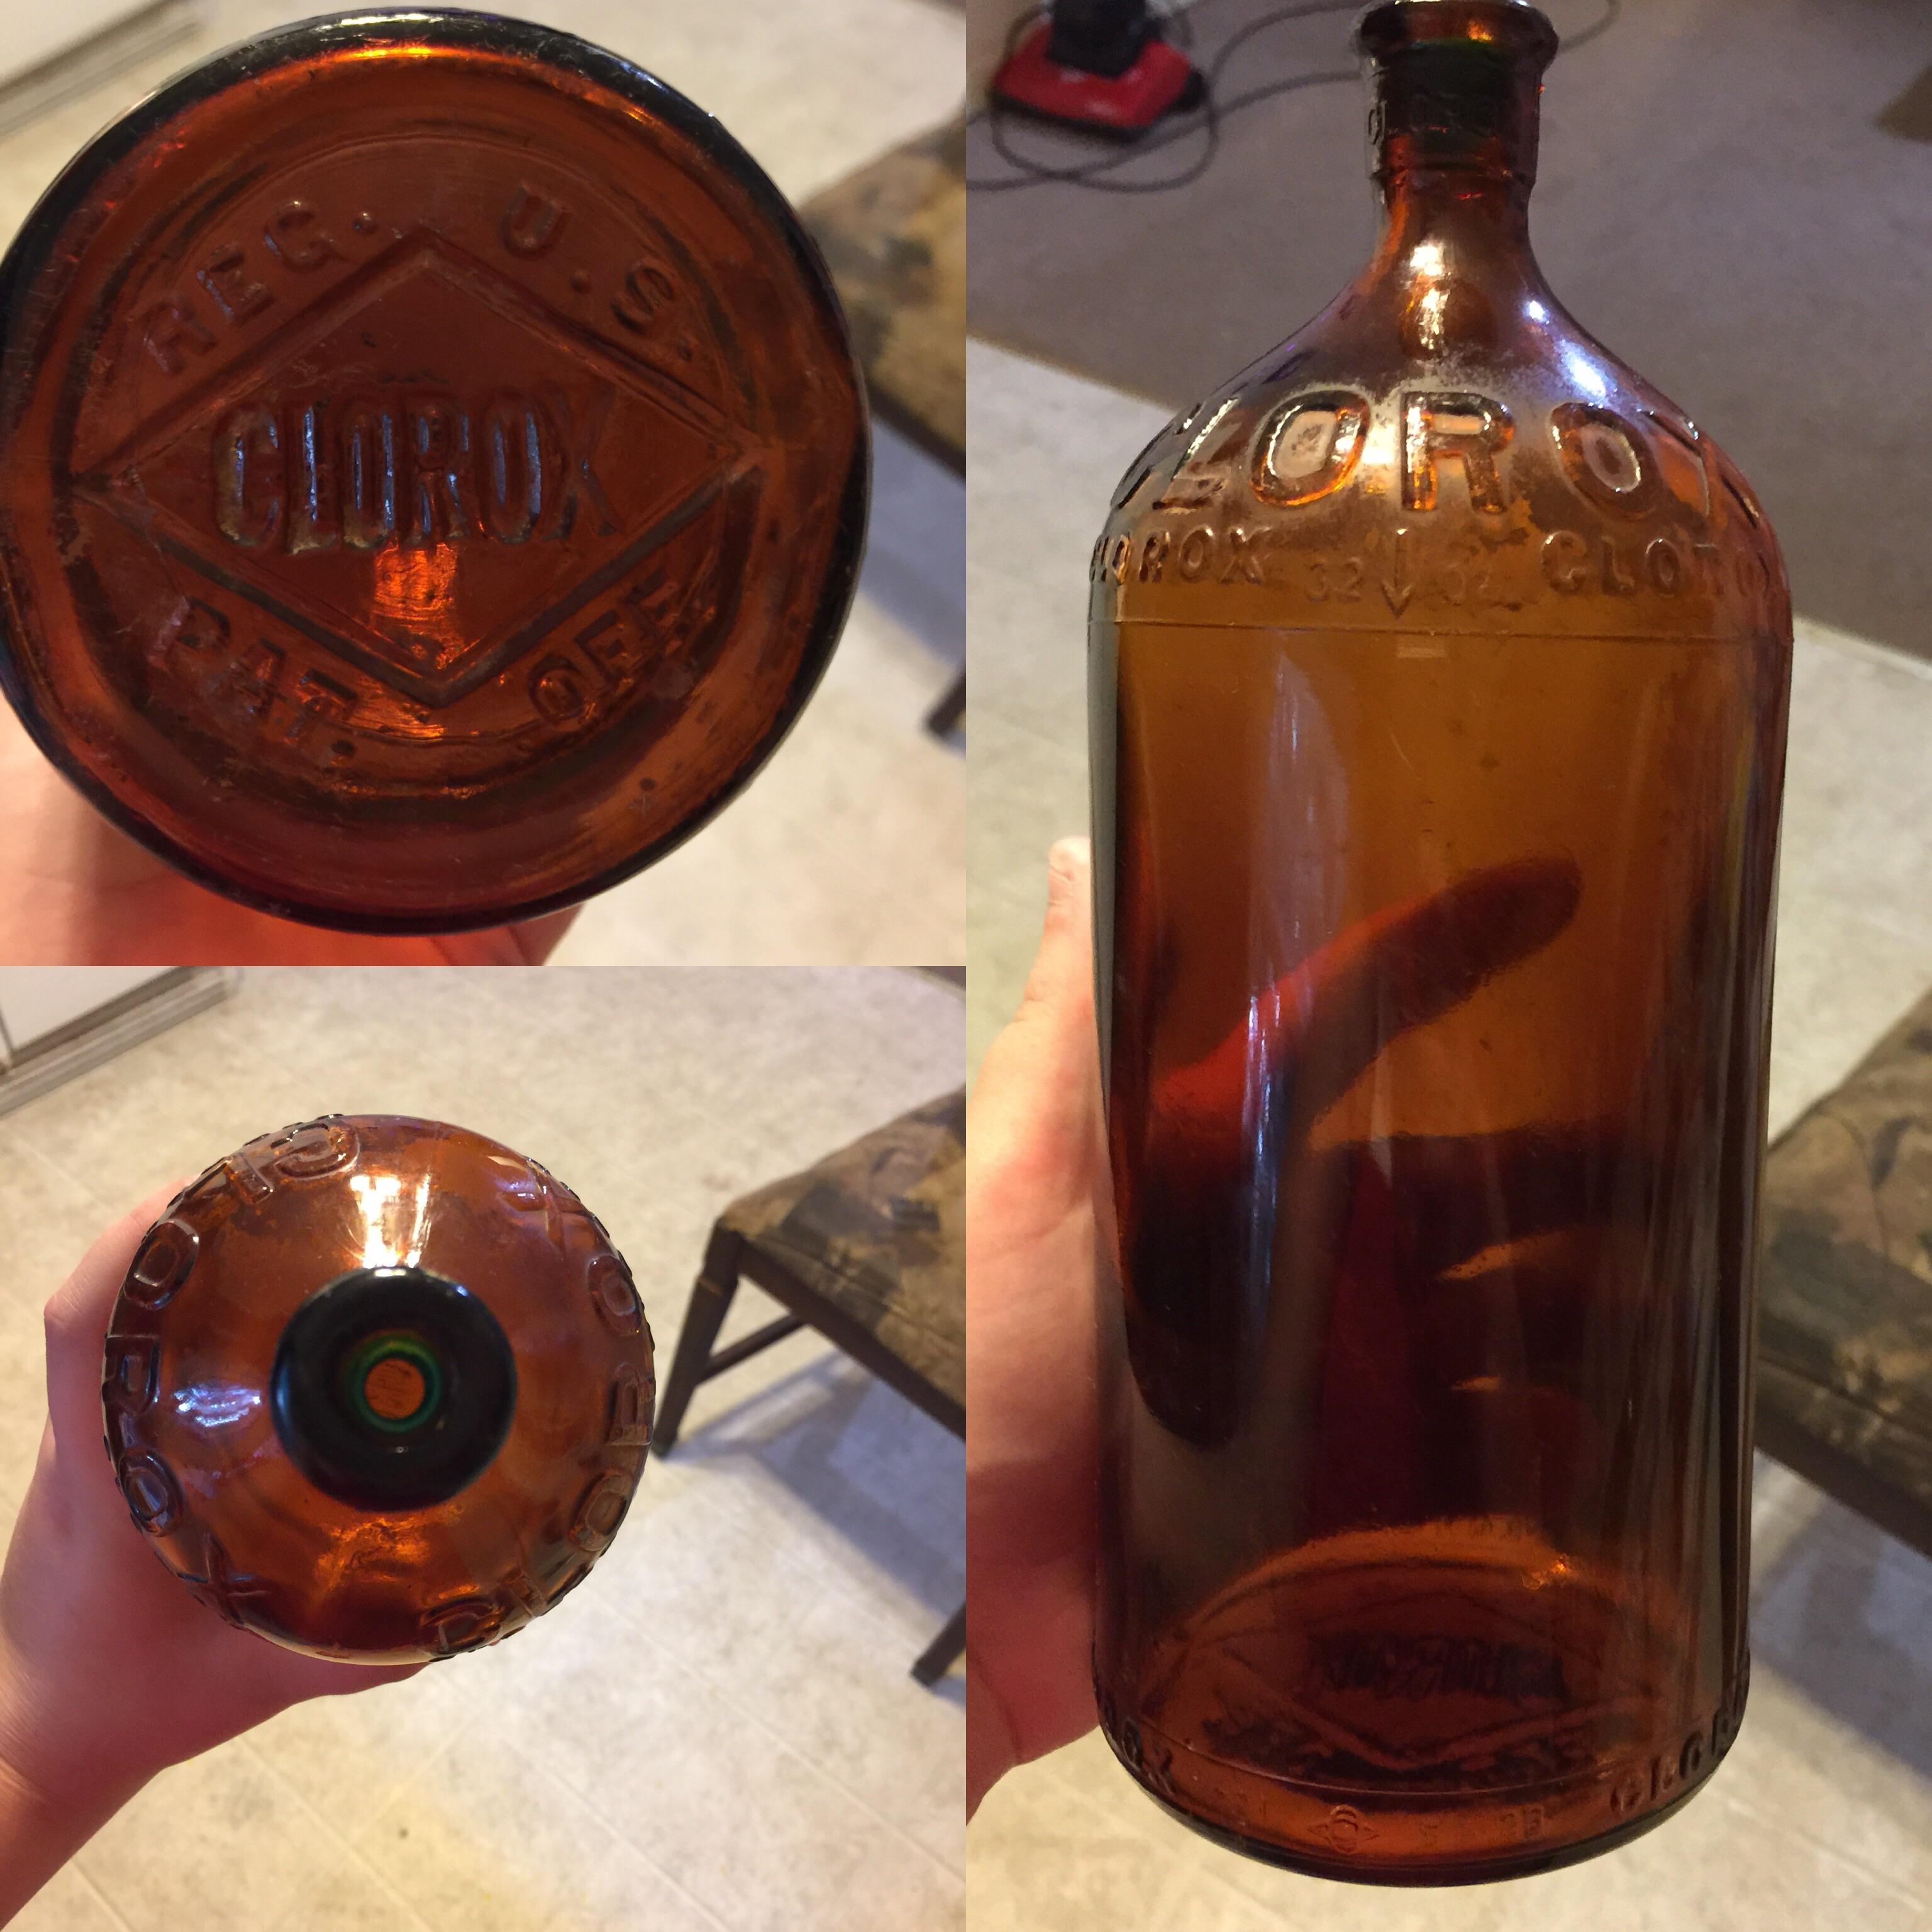 Old Clorox Logo - Found an old Clorox bottle in my basement. Any idea from what year